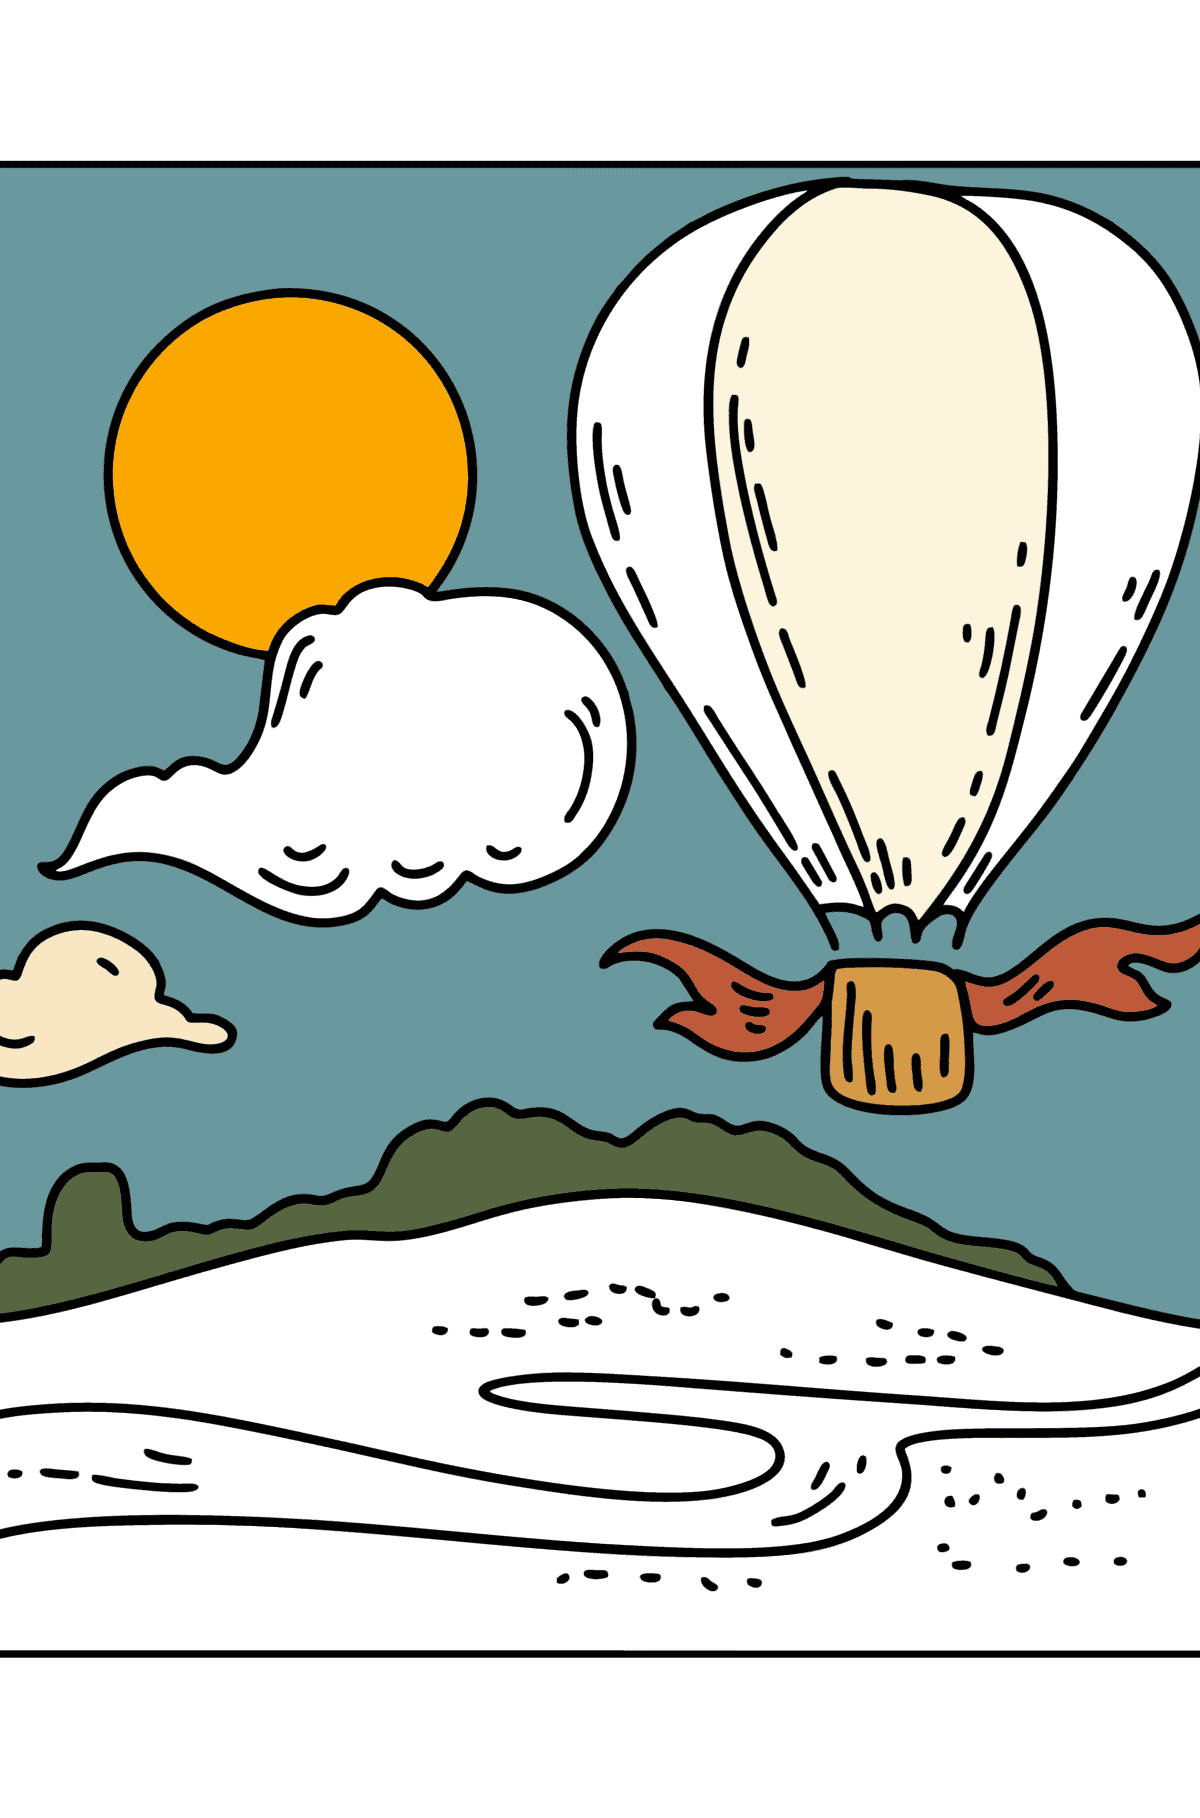 Coloring page - hot air balloon - Coloring Pages for Kids